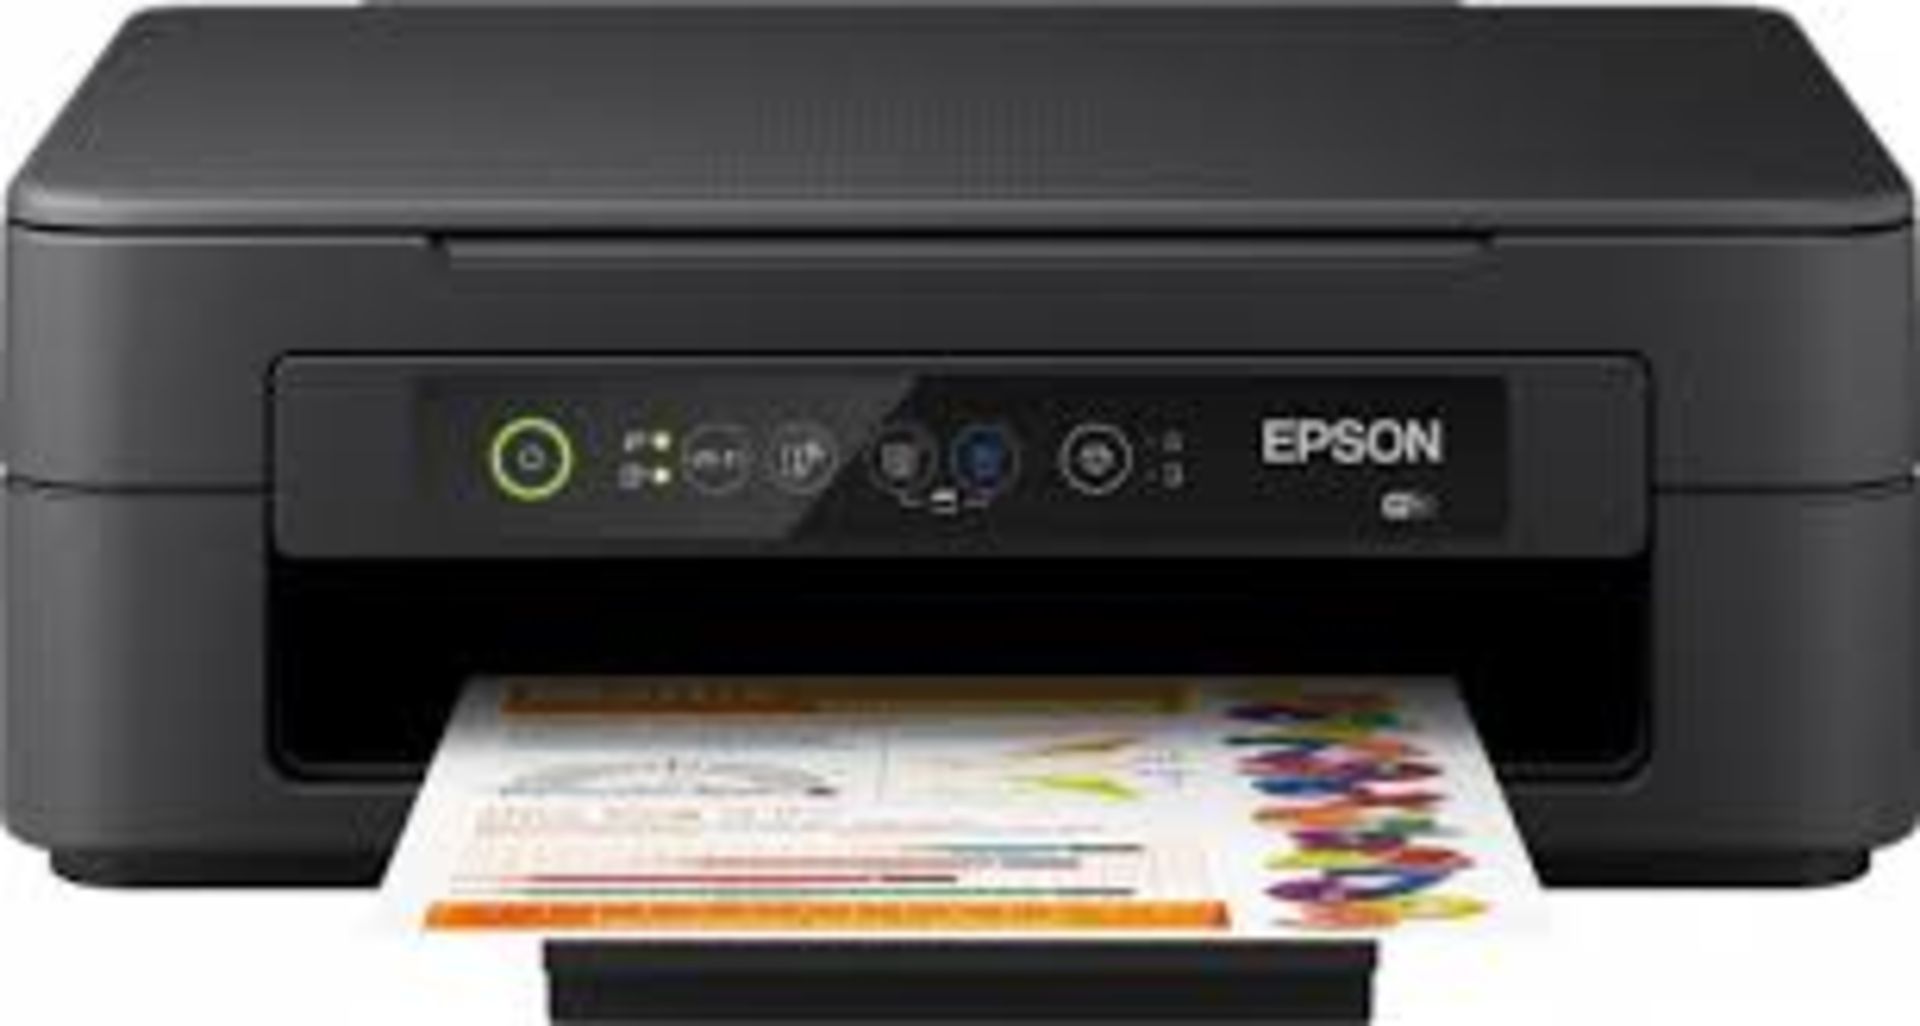 Boxed Epson Expression XP2100 All In One Printer S